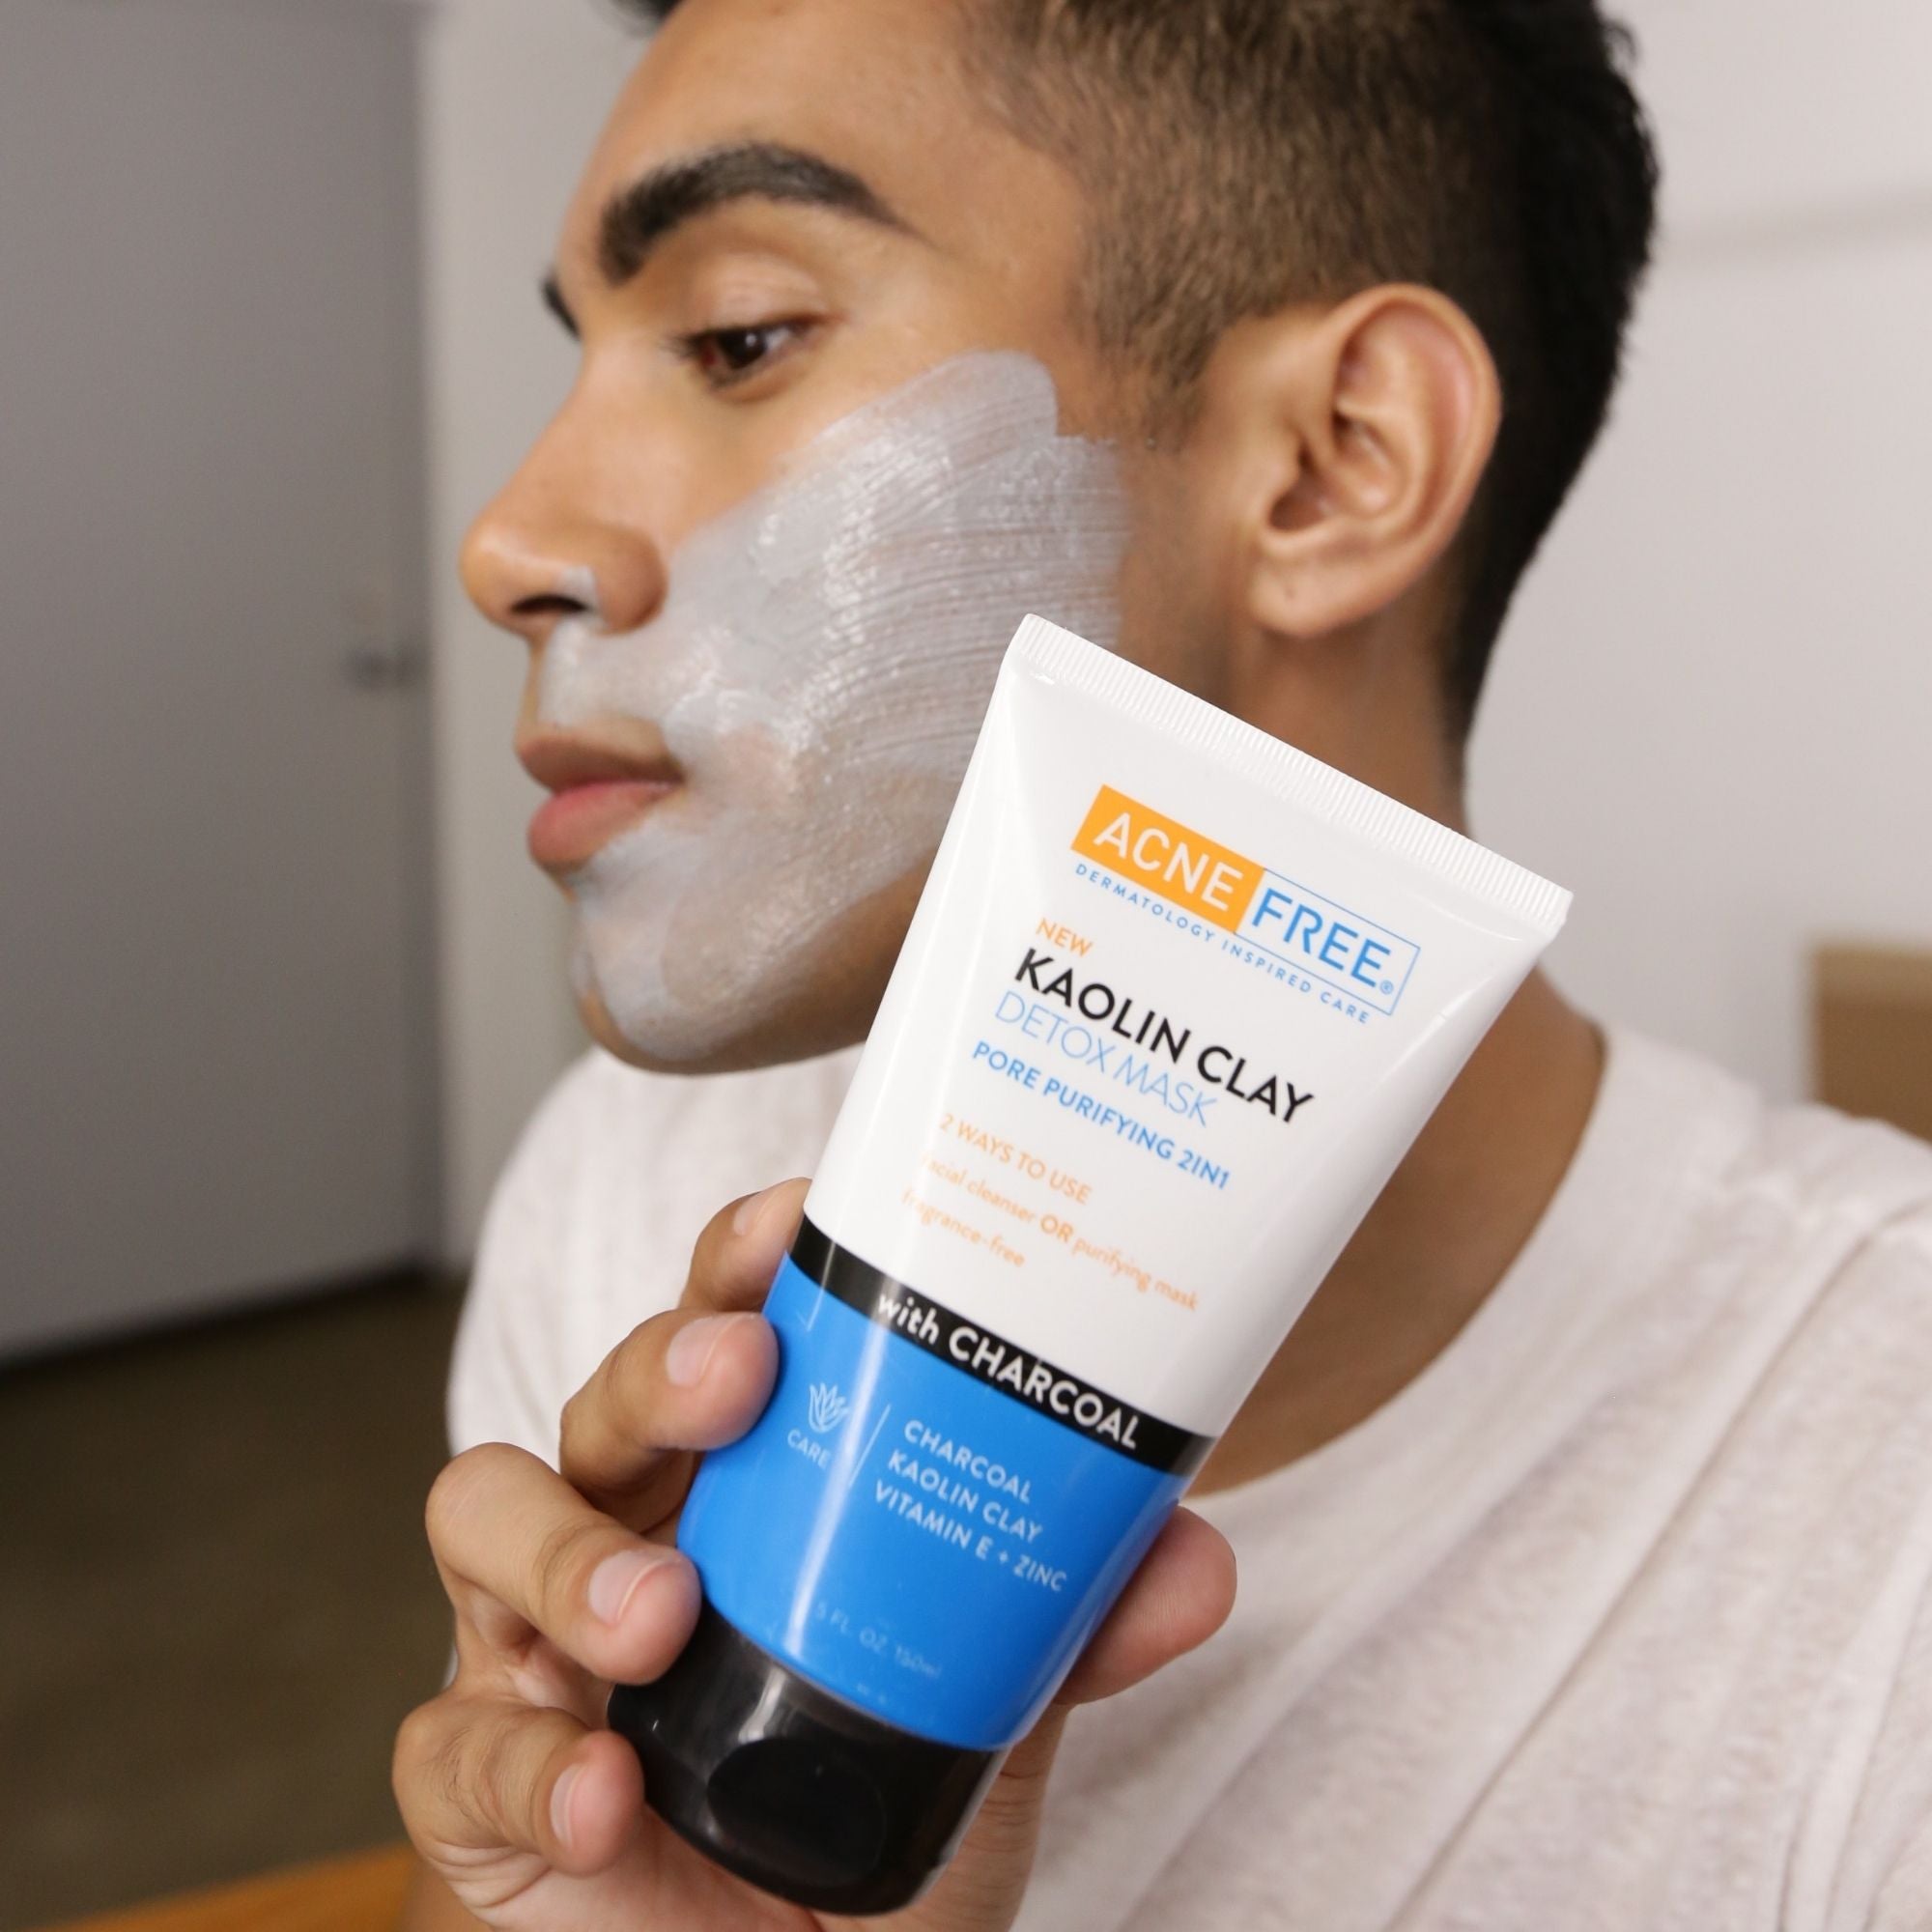 Kaolin Clay Mask With Charcoal - AcneFree Dermatology Care